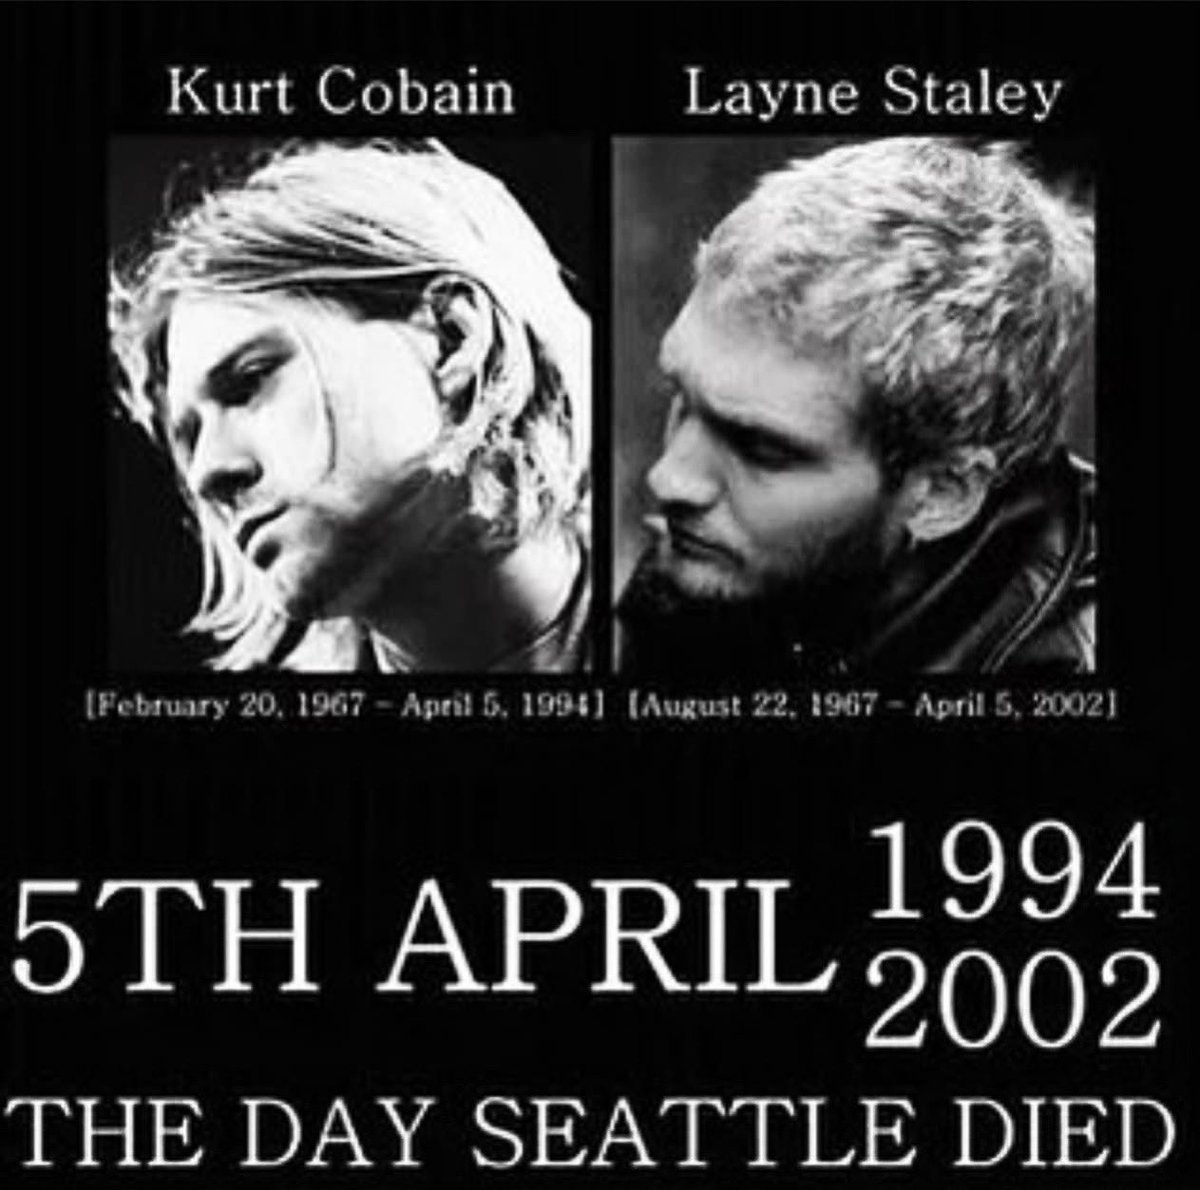 🗓️ April 5th… a date that will live in Grunge infamy as “The Day Seattle Died. Today we honor and remember #KurtCobain (1967-1994) and #LayneStaley (1967-2002) 🕊❤️

Listen to some #Nirvana & #AliceInChains today

#nirvanaunplugged #aicunplugged #mtvunplugged #thisisjustatribute